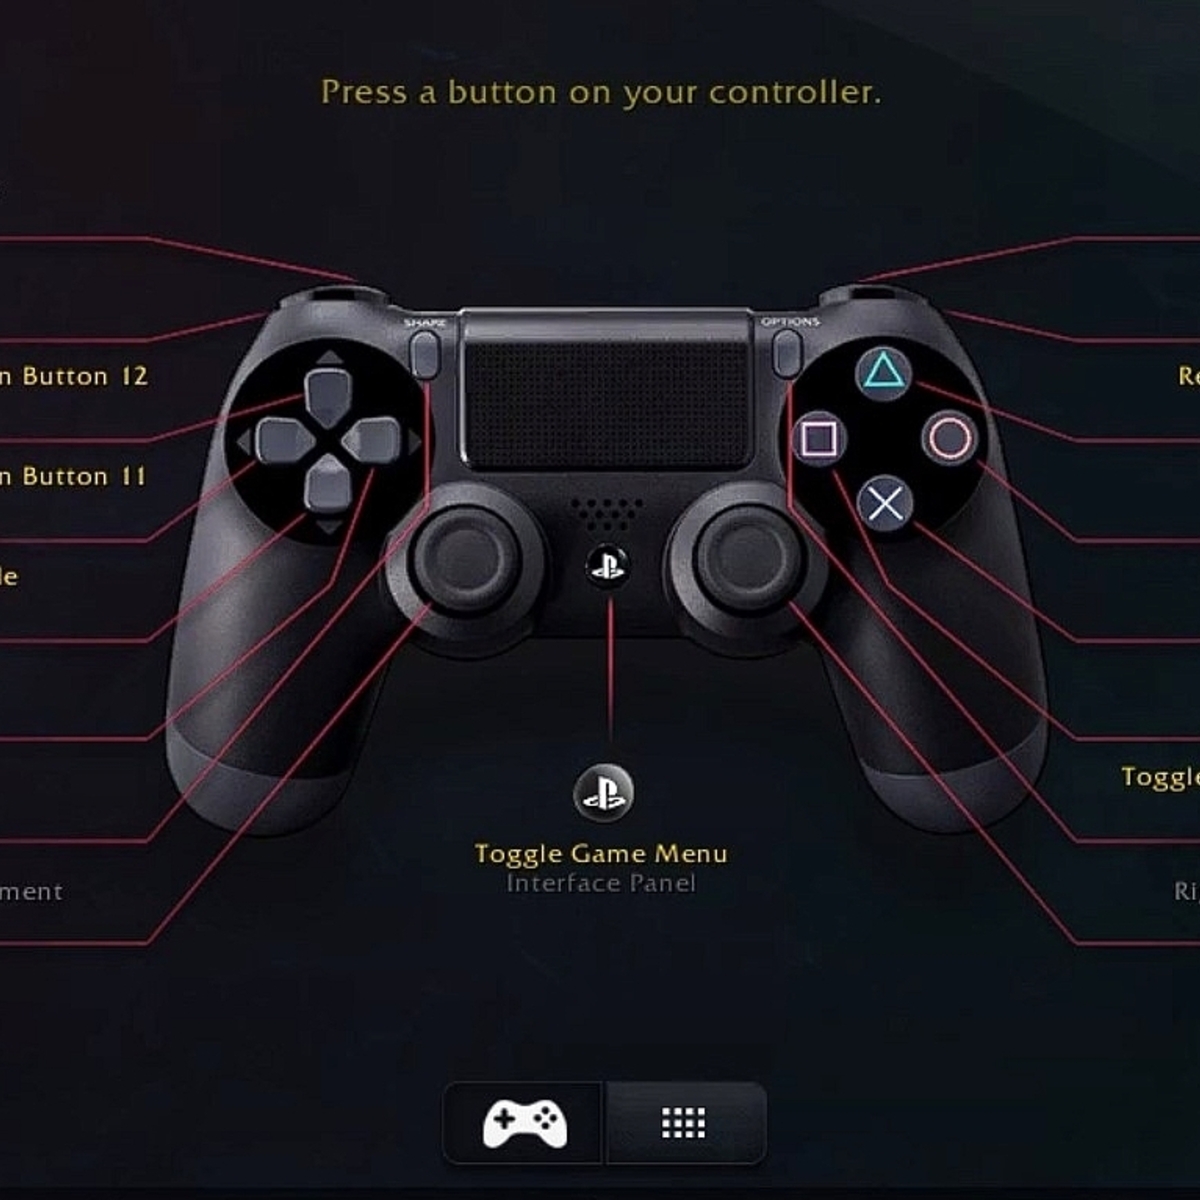 Locate the PlayStation Controller Support option, and click on it.